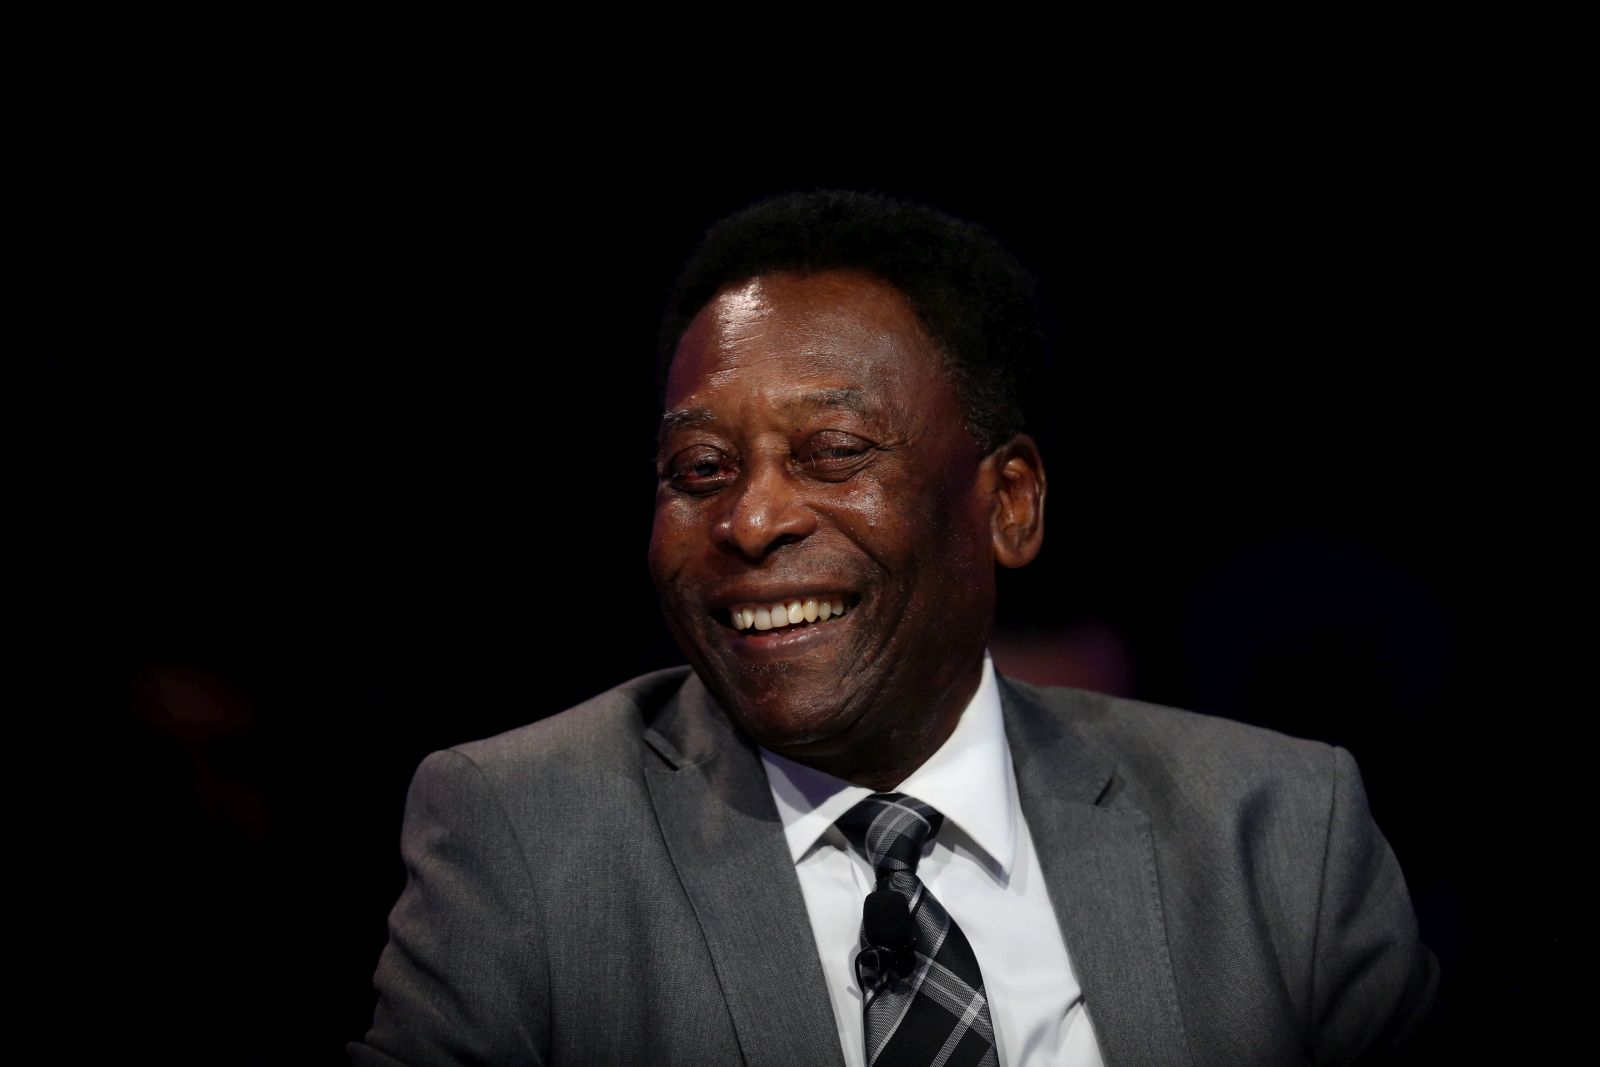 epa10381764 (FILE) Brazilian former soccer player Pele speaks during the Wolrd Economic Forum for Latin America in Sao Paulo, Brazil, 14 March 2018 (reissued 29 December 2022). According to his agent, Pele, whose proper name is Edson Arantes do Nascimento, has died on 28 December 2022 at age 82.  EPA/Fernando Bizerra Jr. *** Local Caption *** 54198563